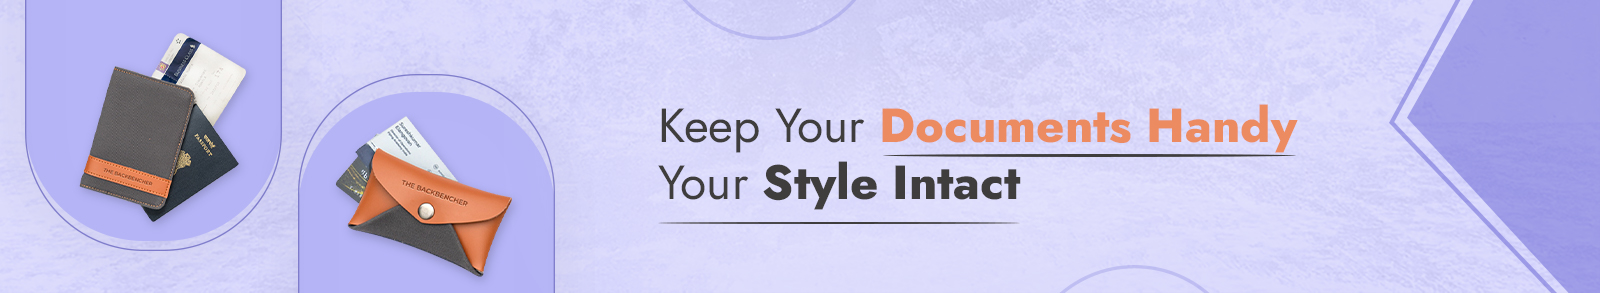 Keep Your Documents Handy Your Style Intact